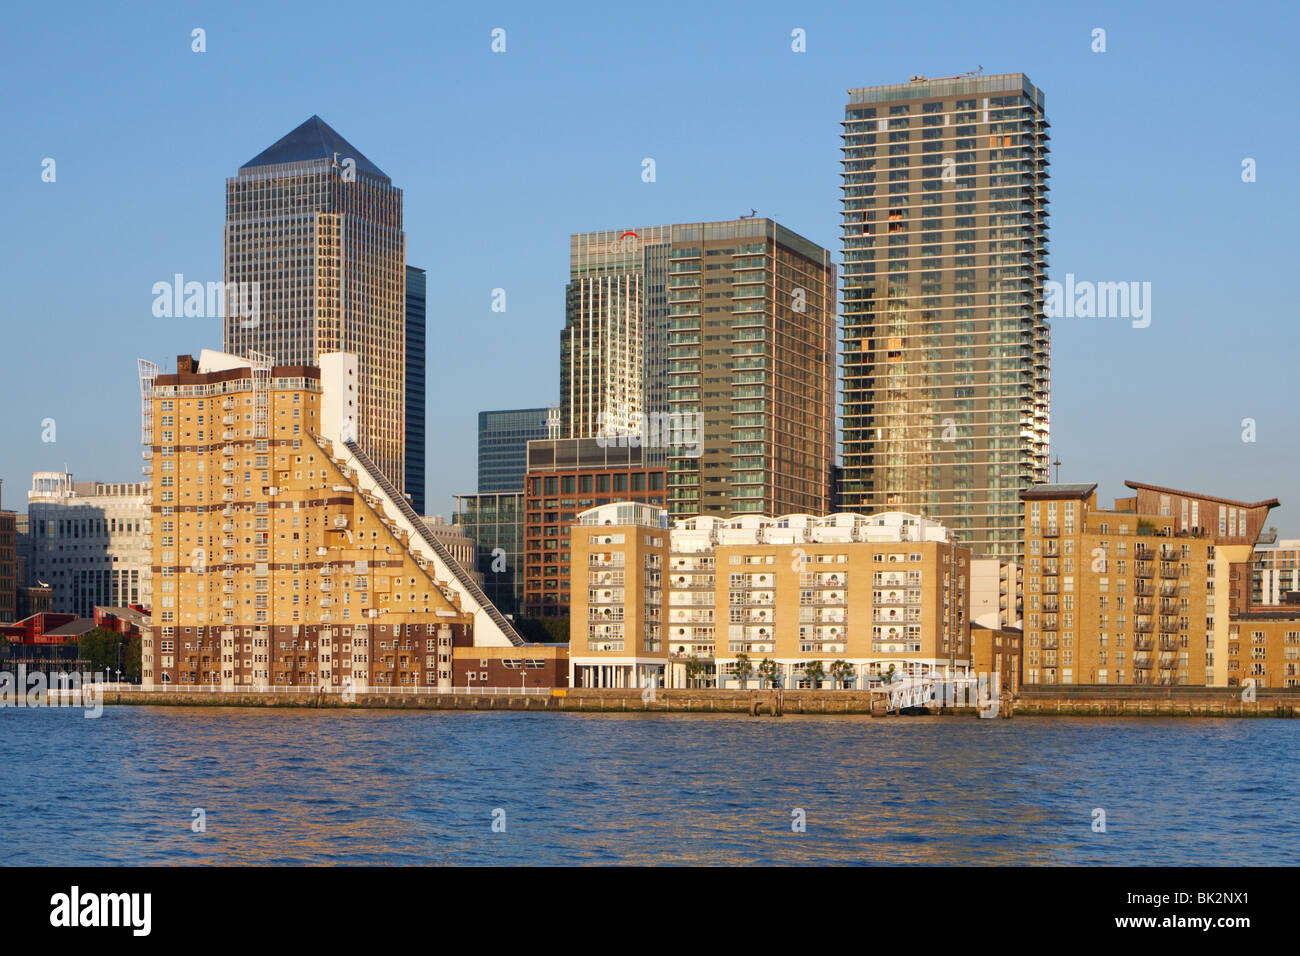 Canary Wharf, London, 2009. Banque D'Images